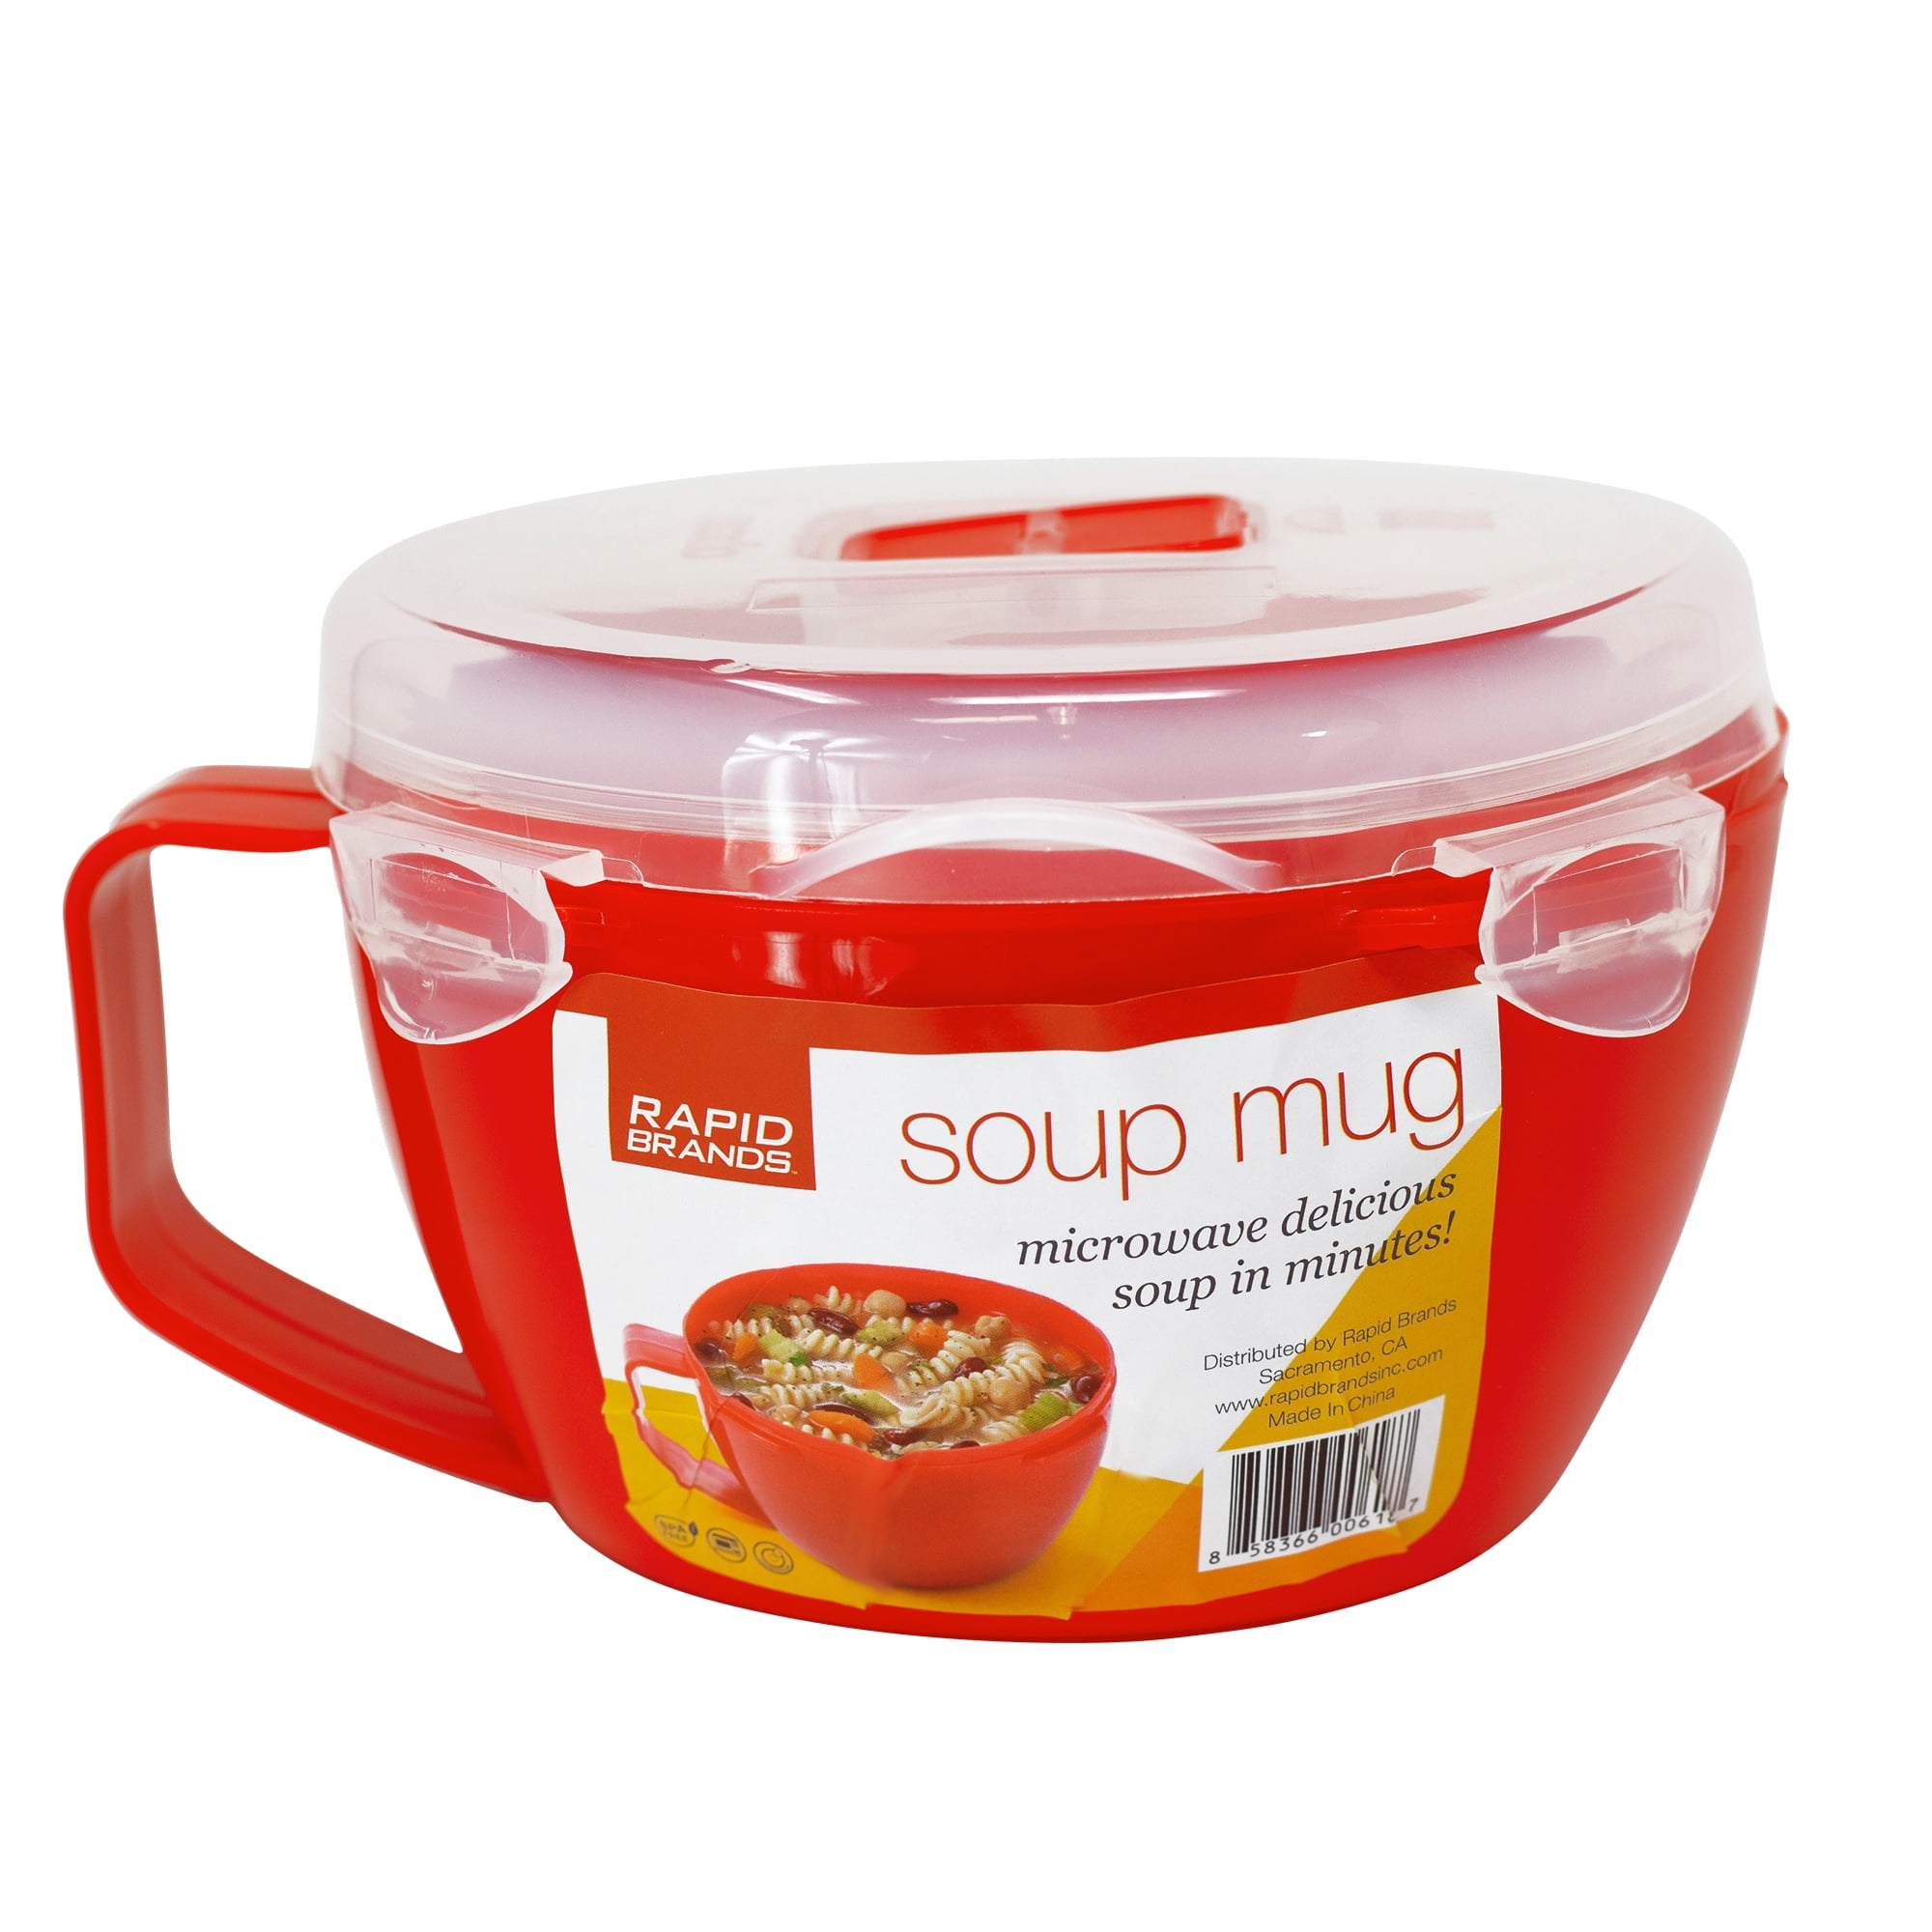 LMRLCS Microwavable Soup Bowl with Handle and Lid